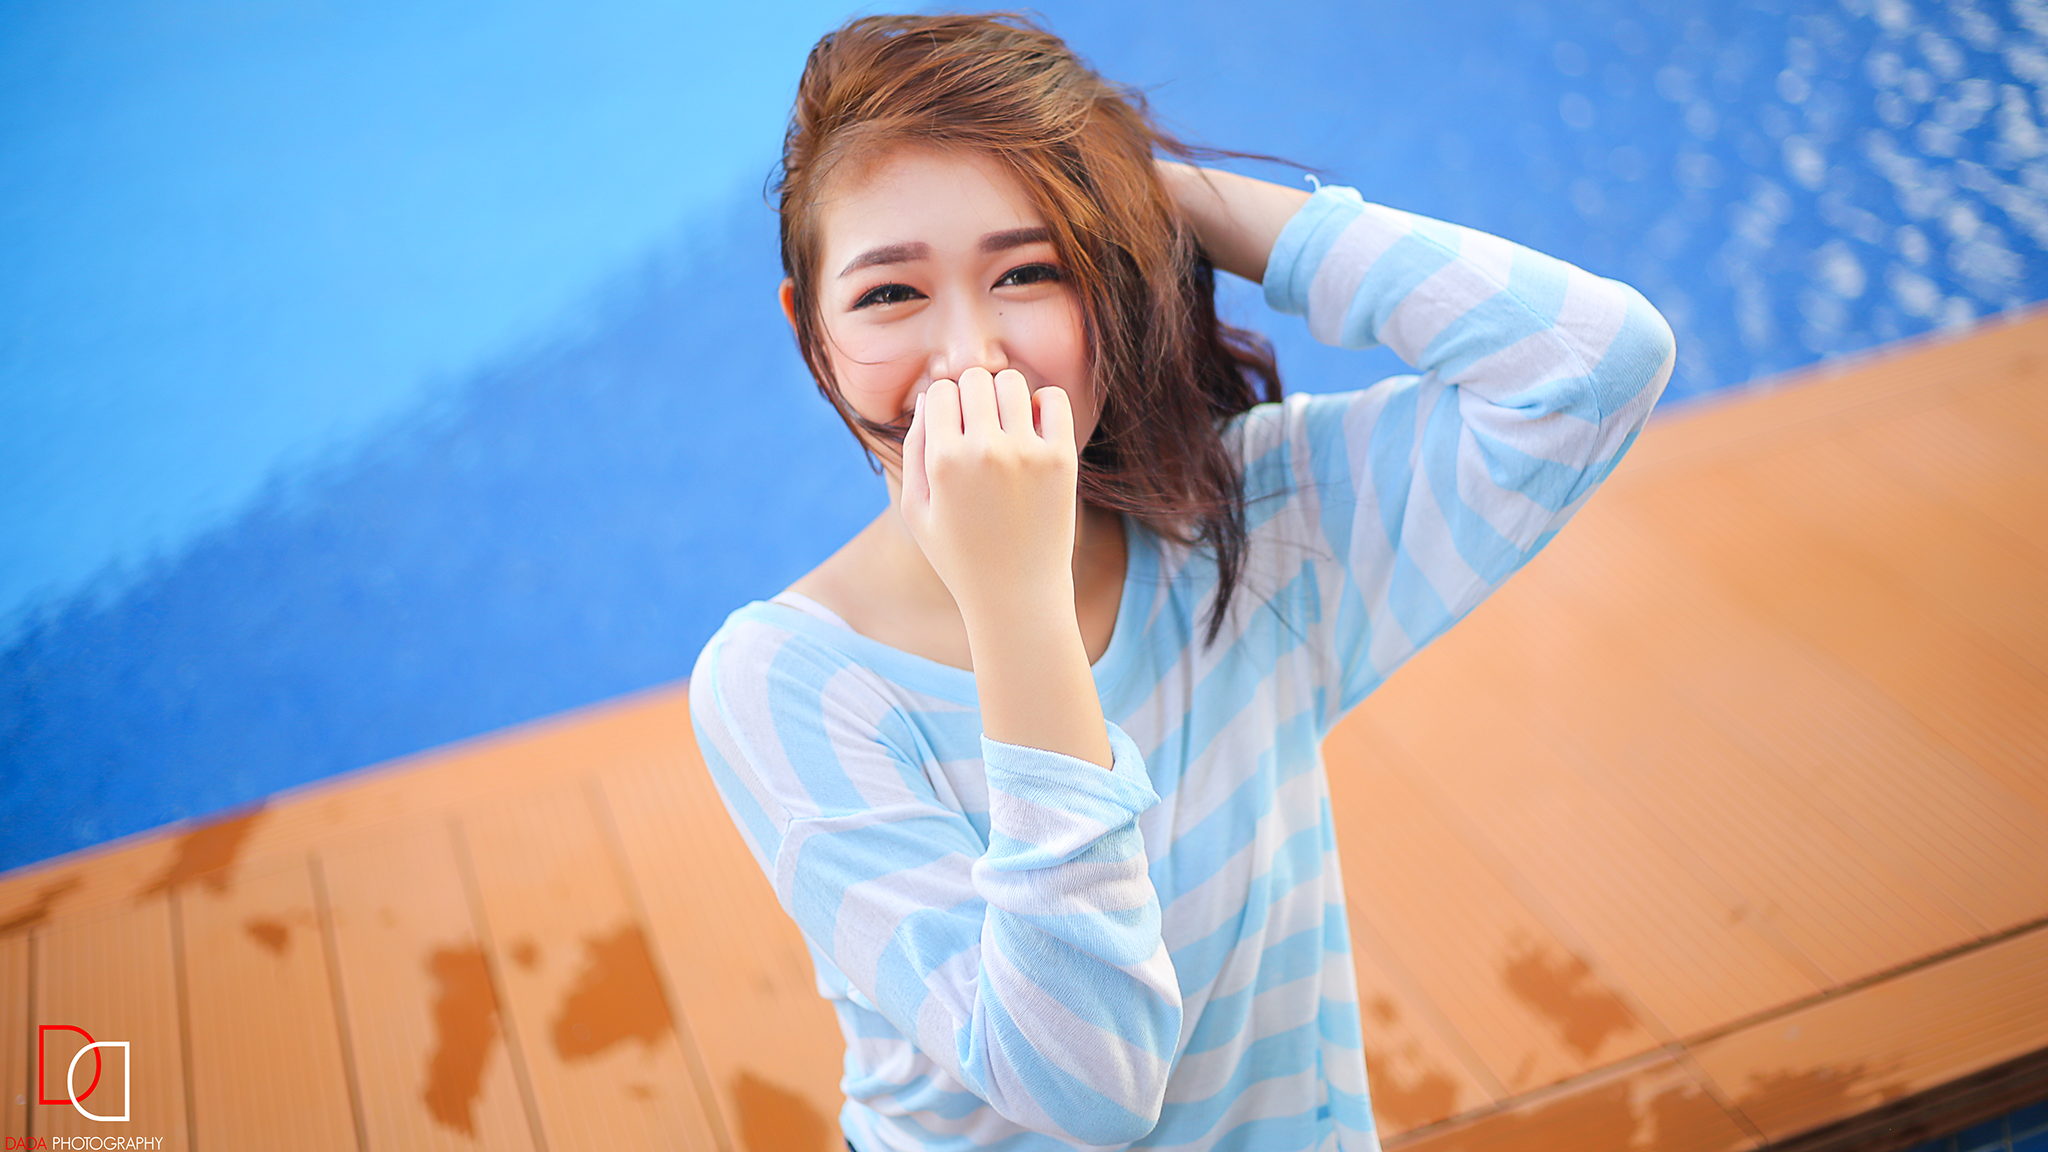 The Best Cute Asian Girl Wallpapers Full HD Free Download